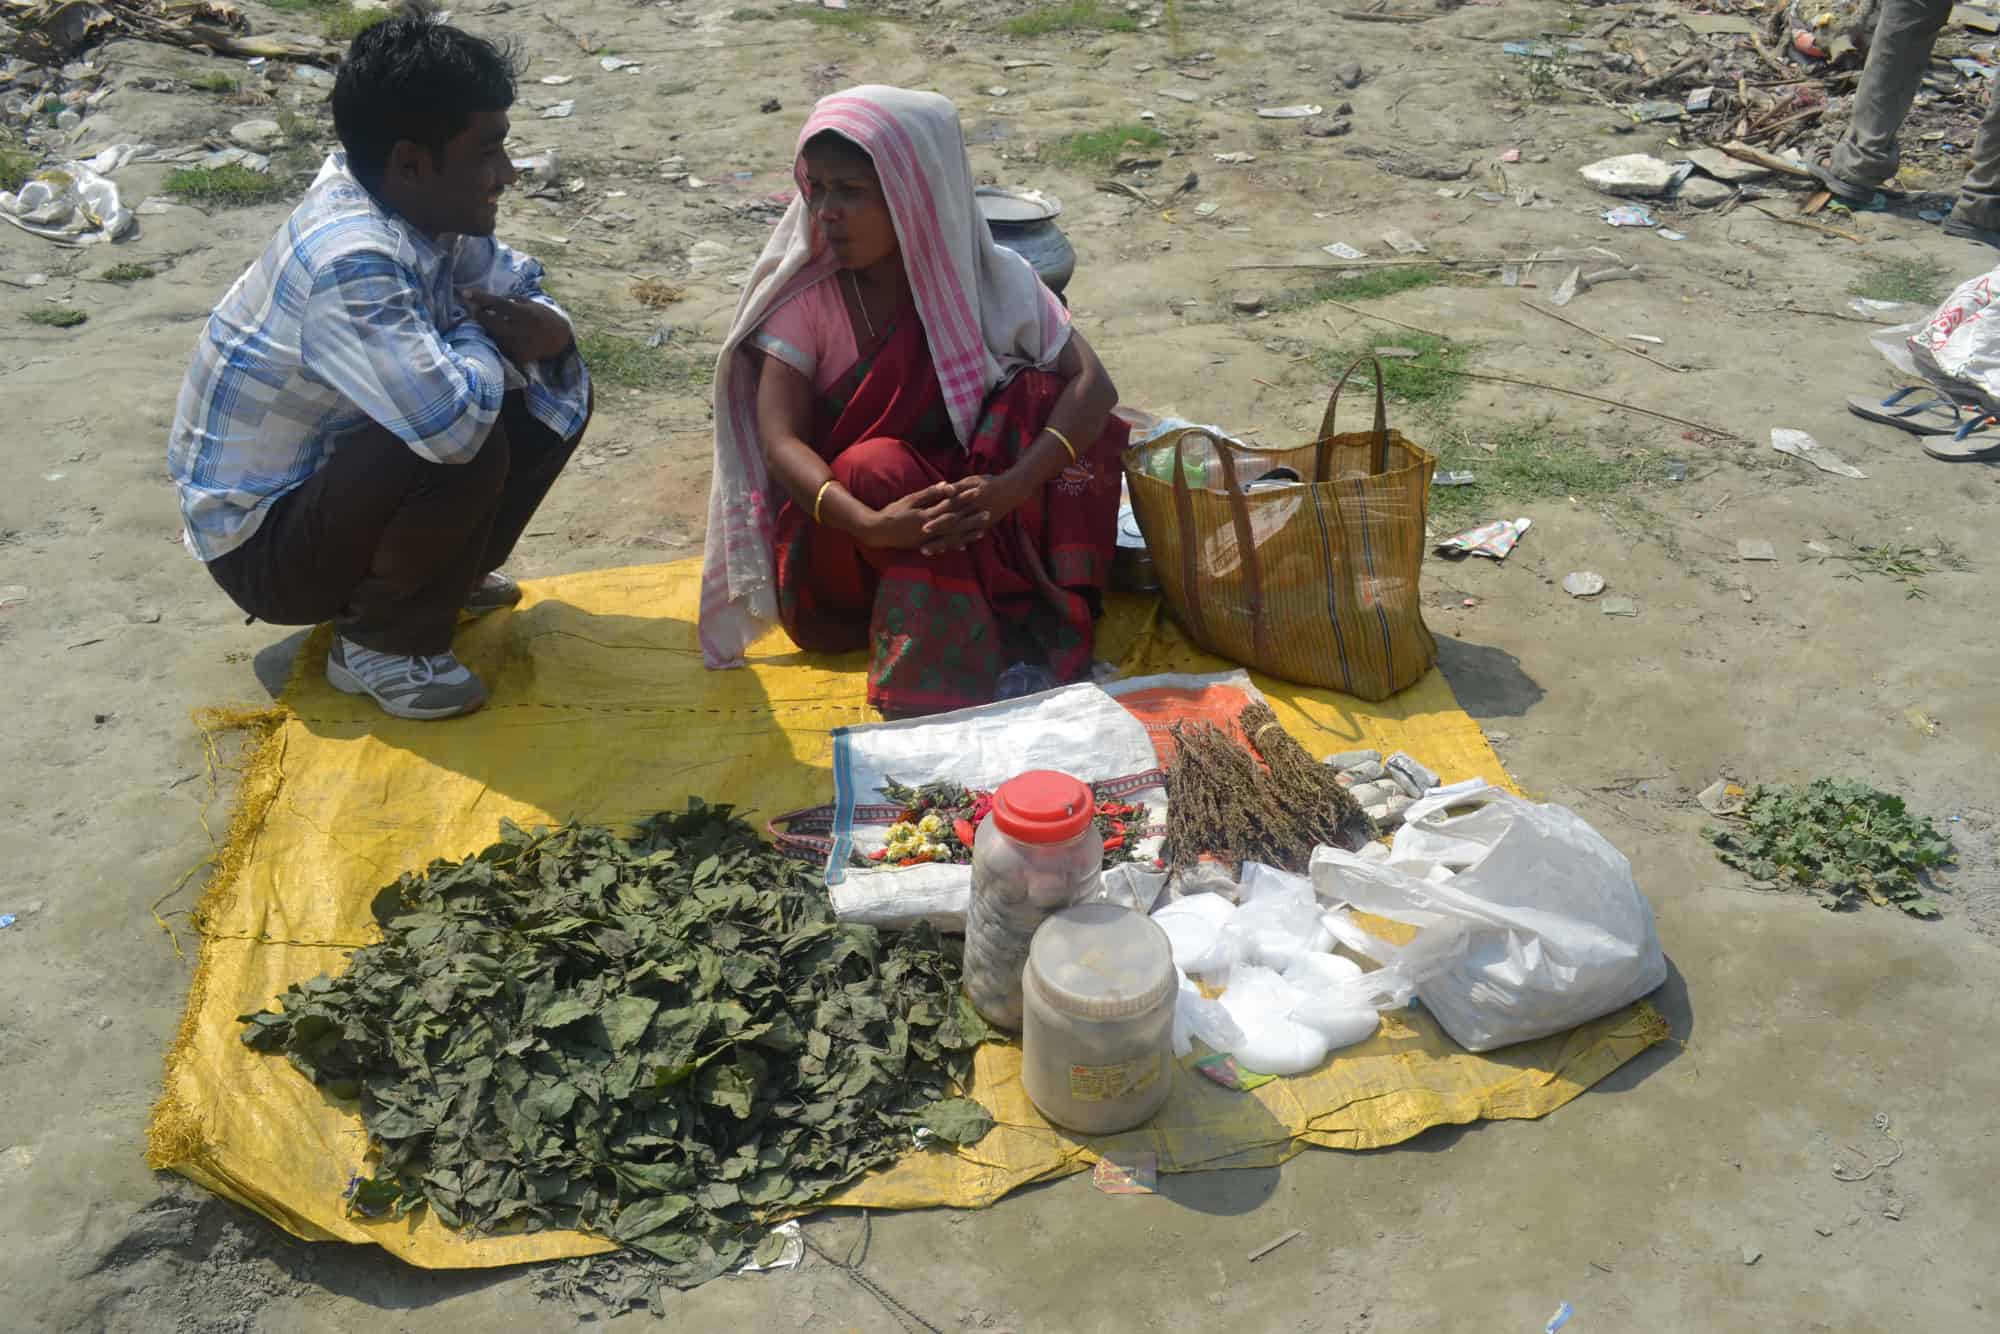 What exactly is bhang? Two people on a blanket with leaves.